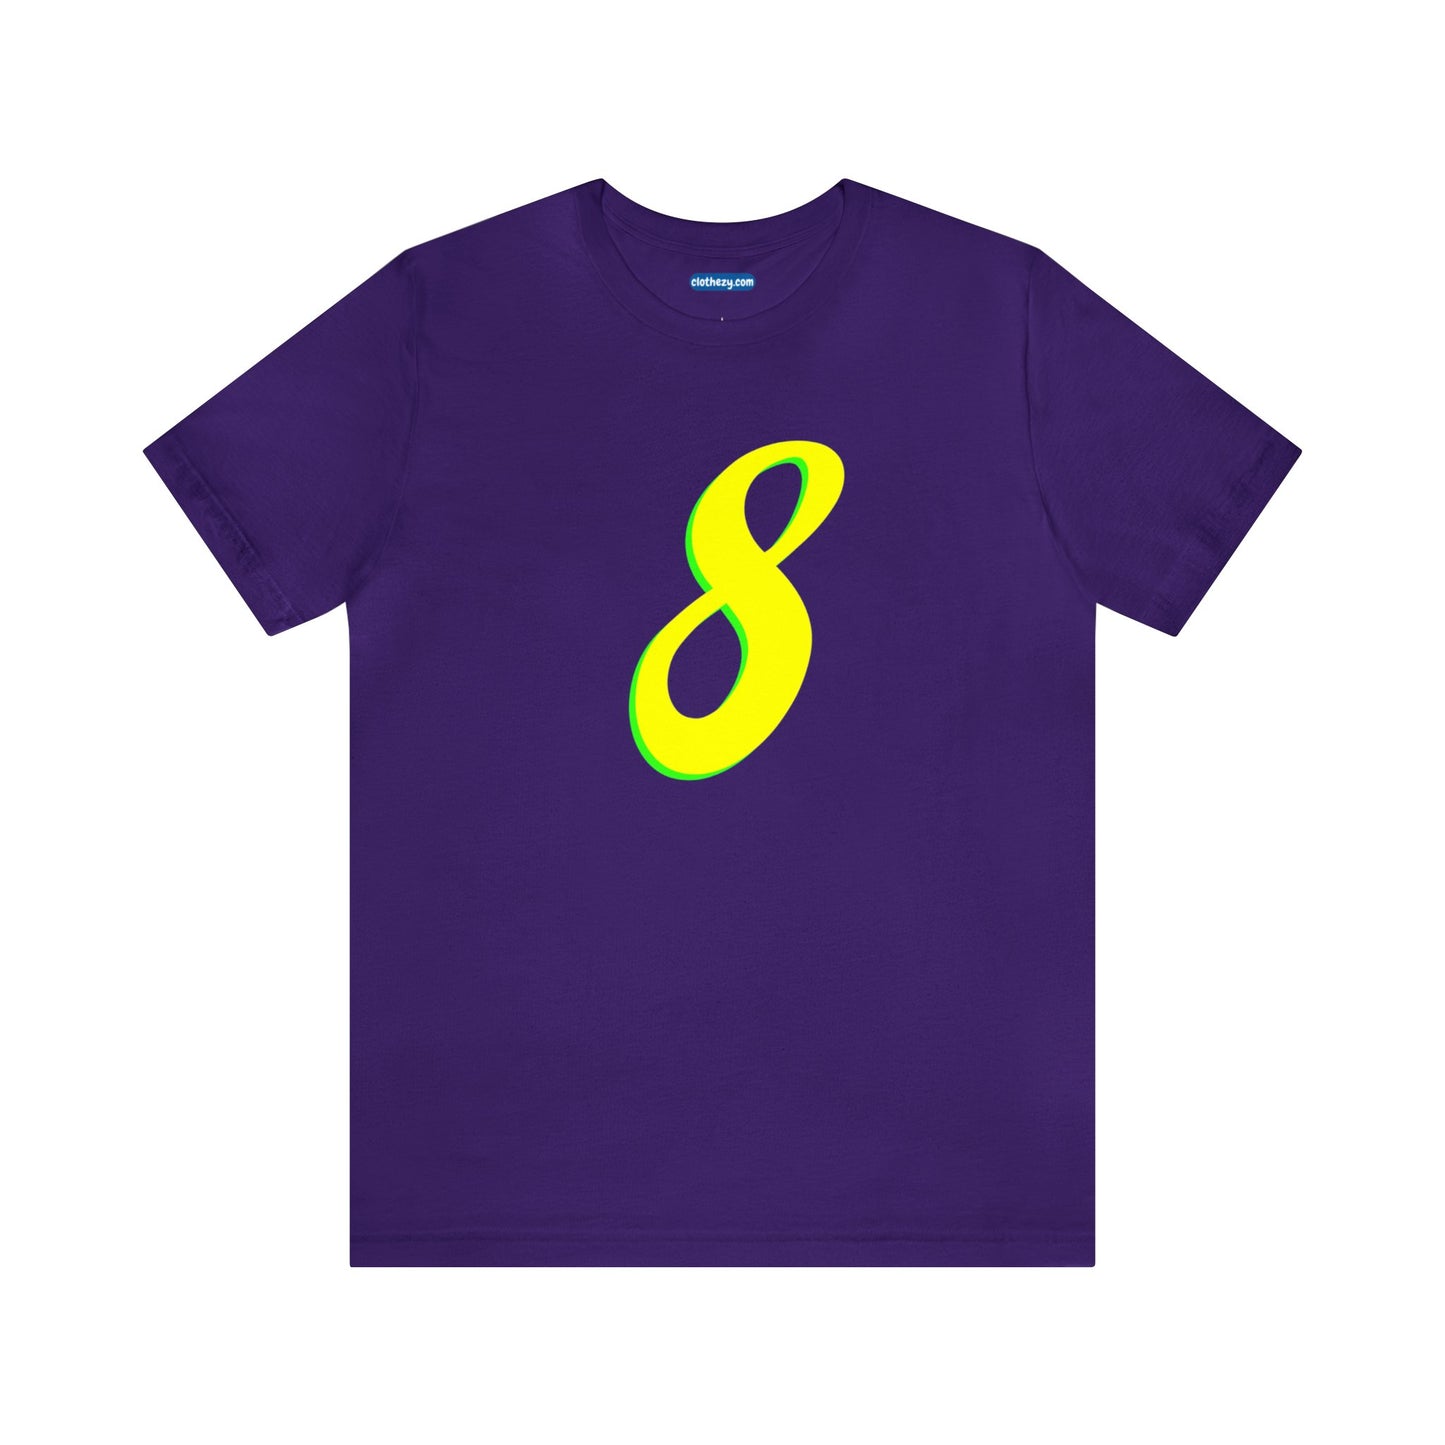 Number 8 Design - Soft Cotton Tee for birthdays and celebrations, Gift for friends and family, Multiple Options by clothezy.com in Royal Blue Size Small - Buy Now